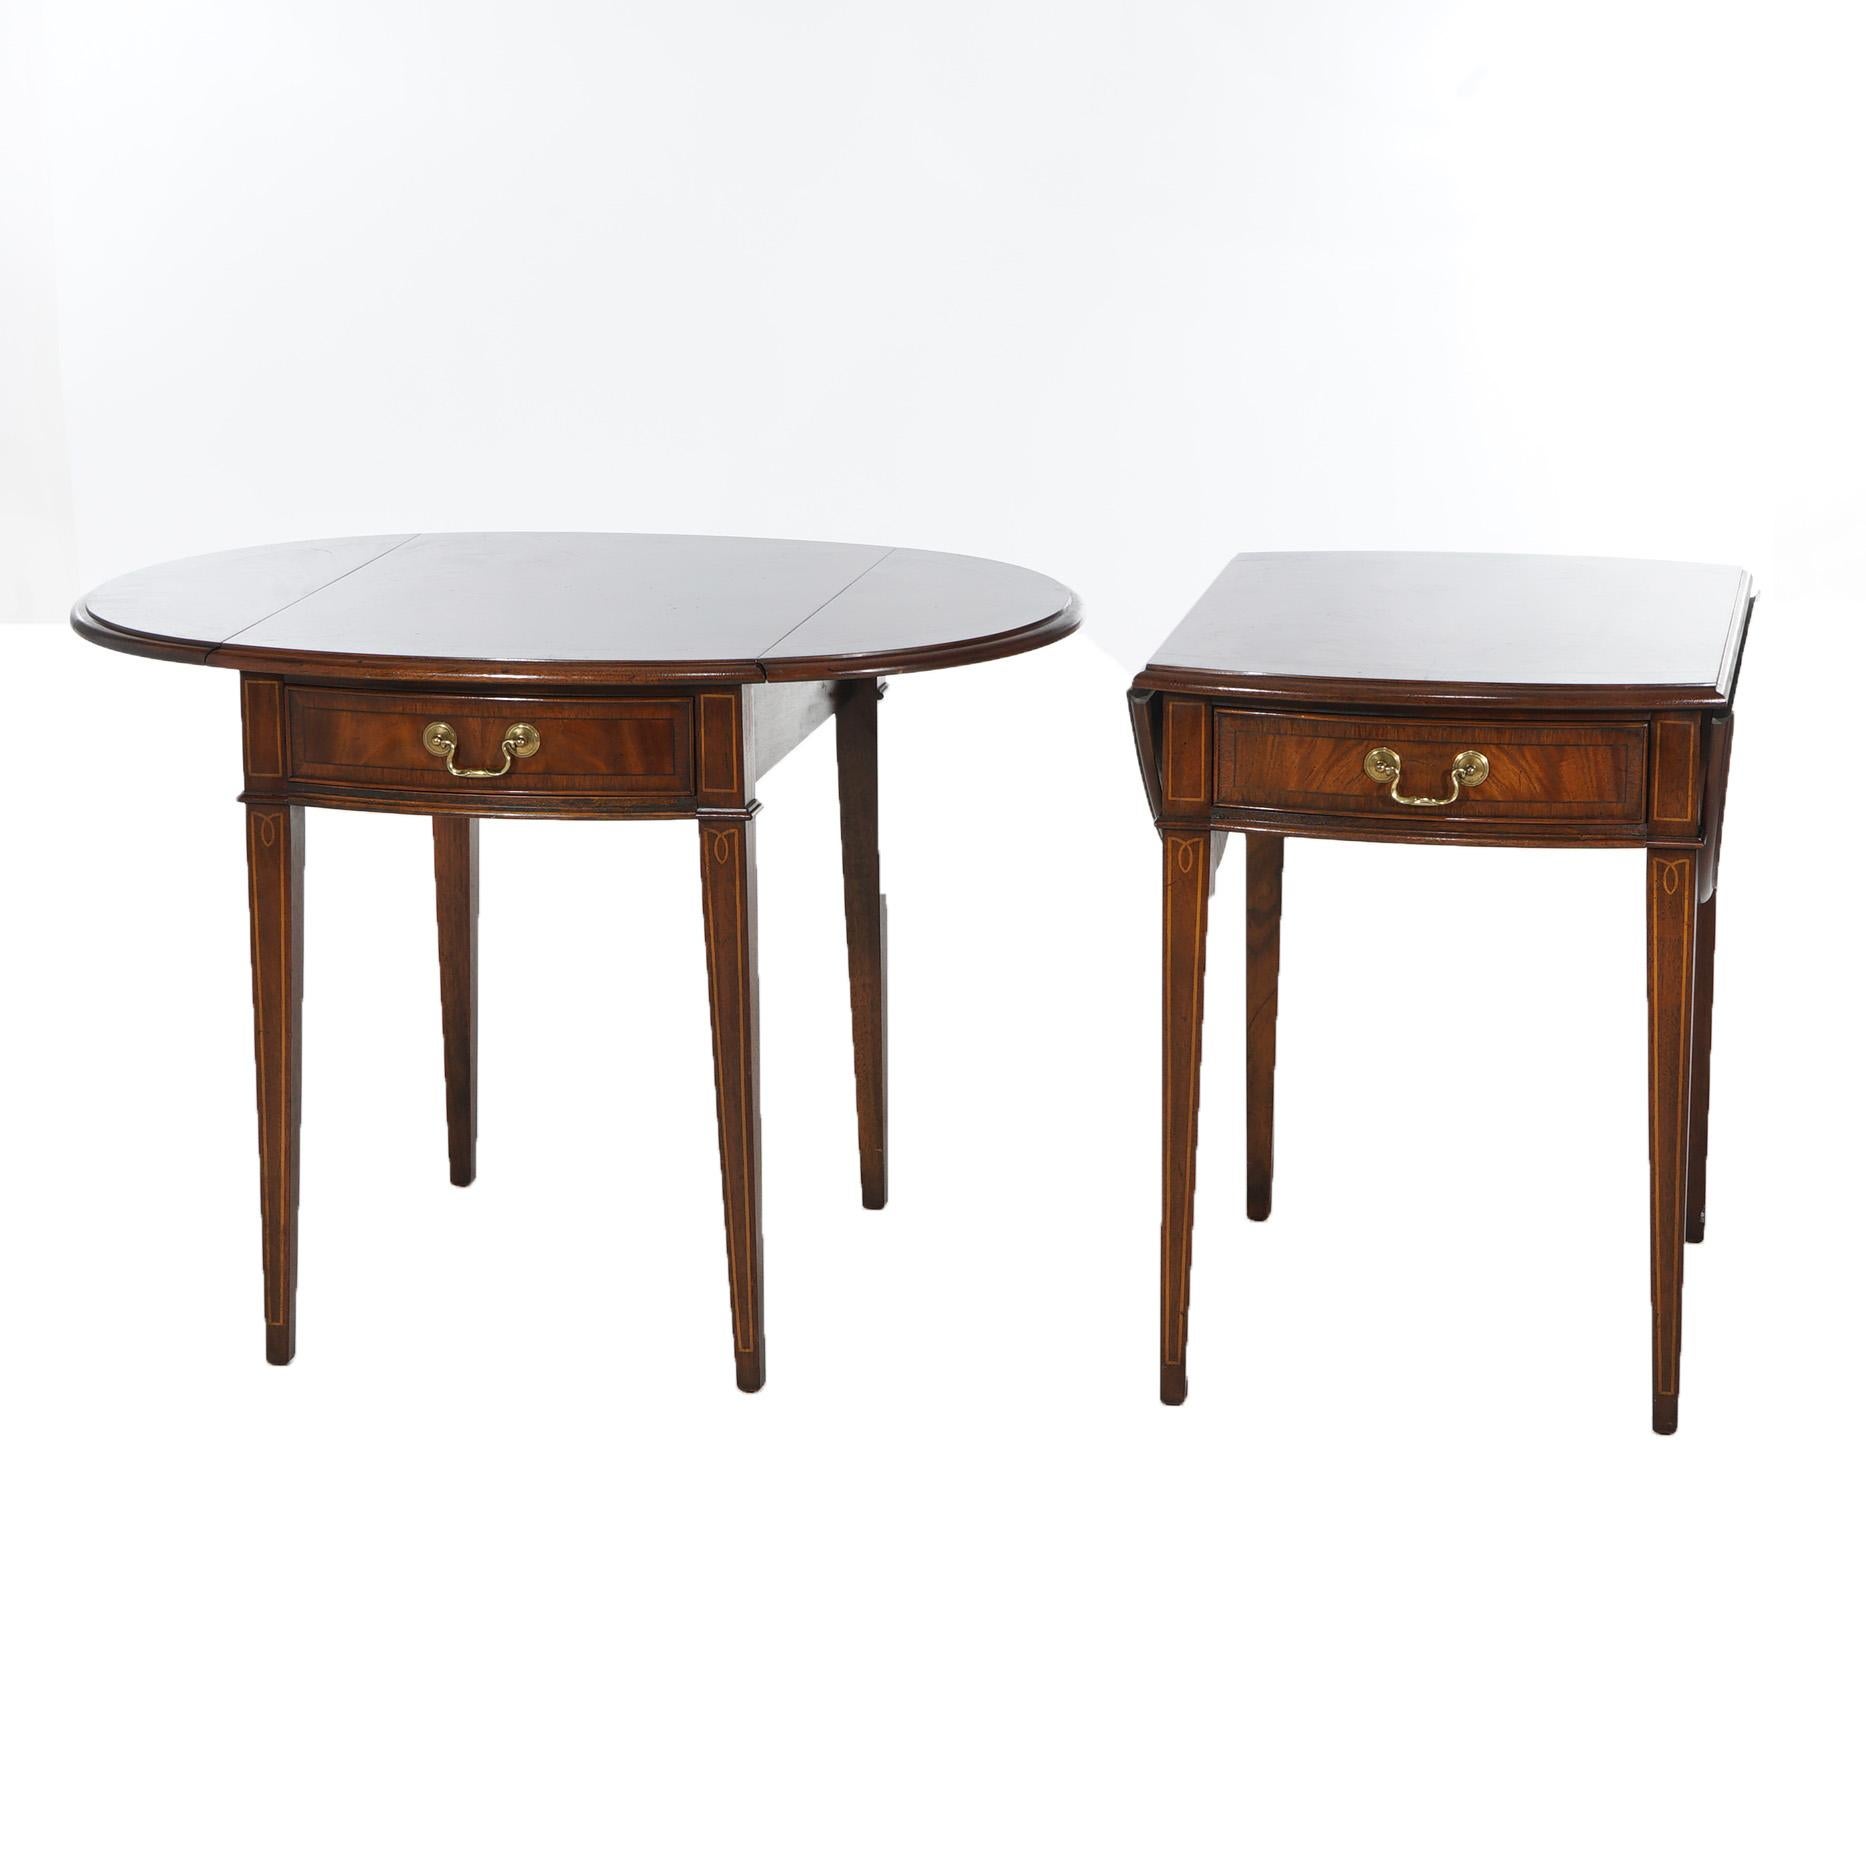 American Pair Hekman Pembroke Style Flame Mahogany Side Tables 20thC For Sale